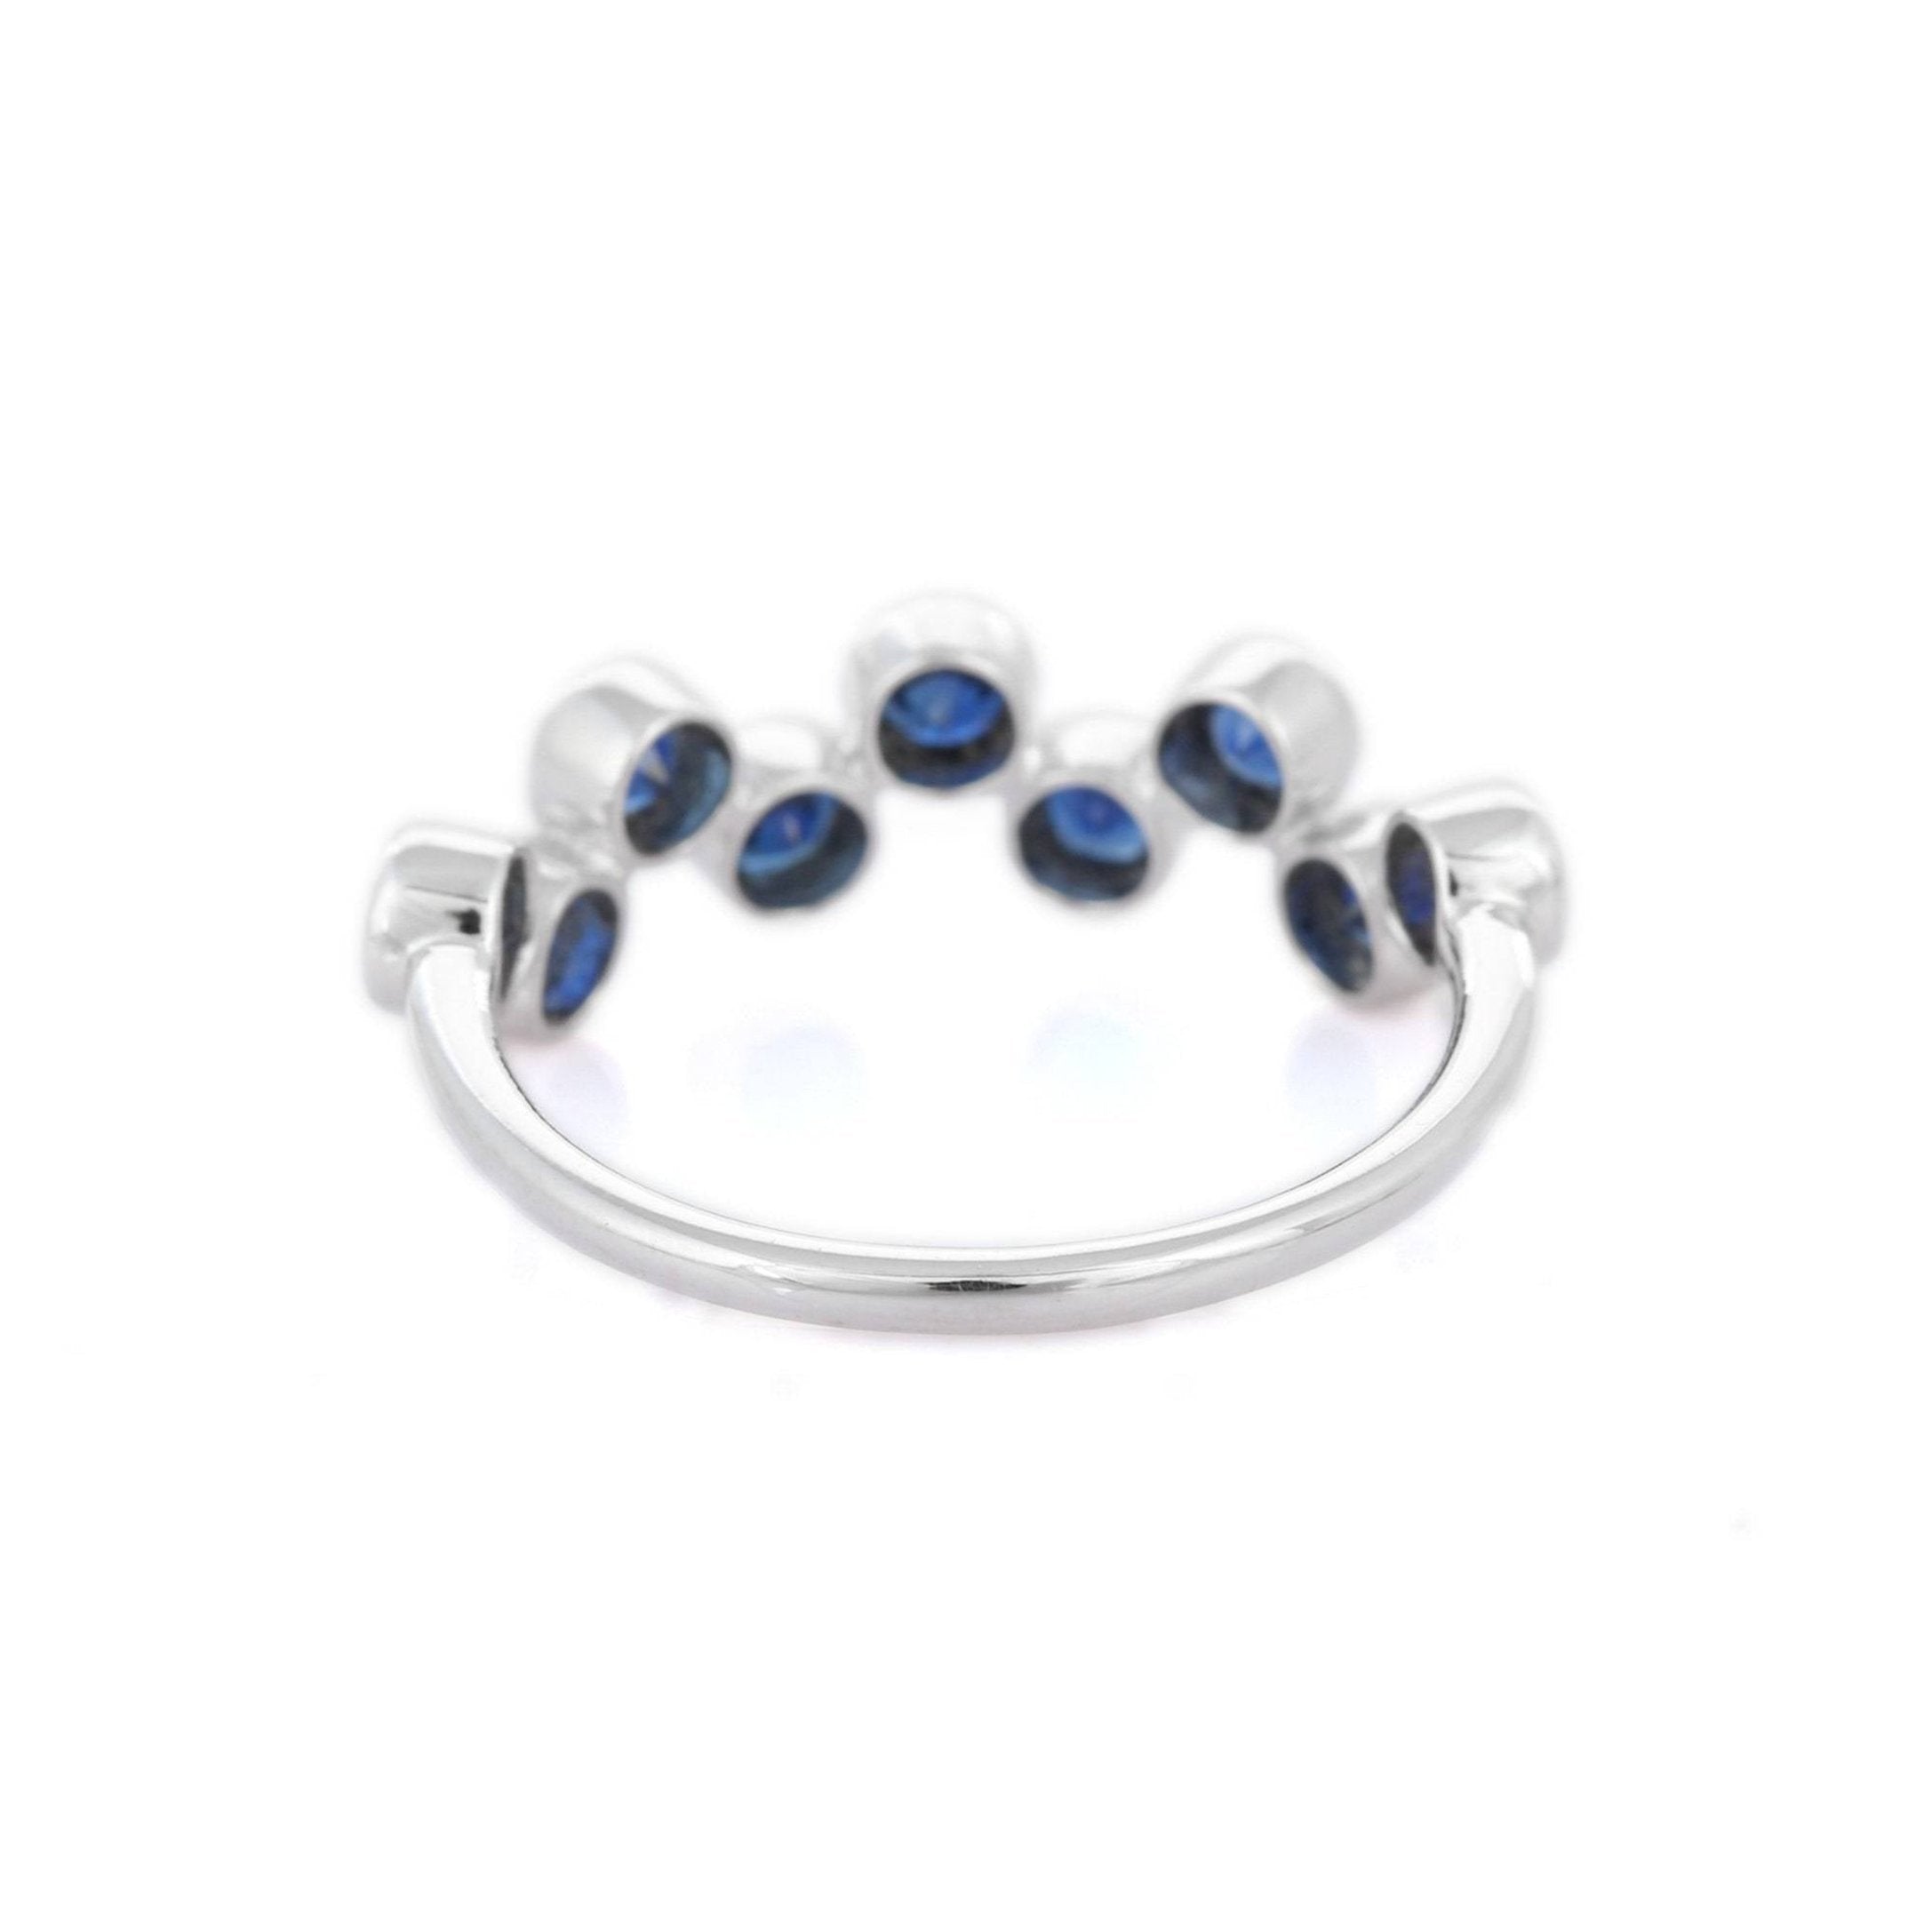 18K White Gold Sapphire Ring - VR Jewels